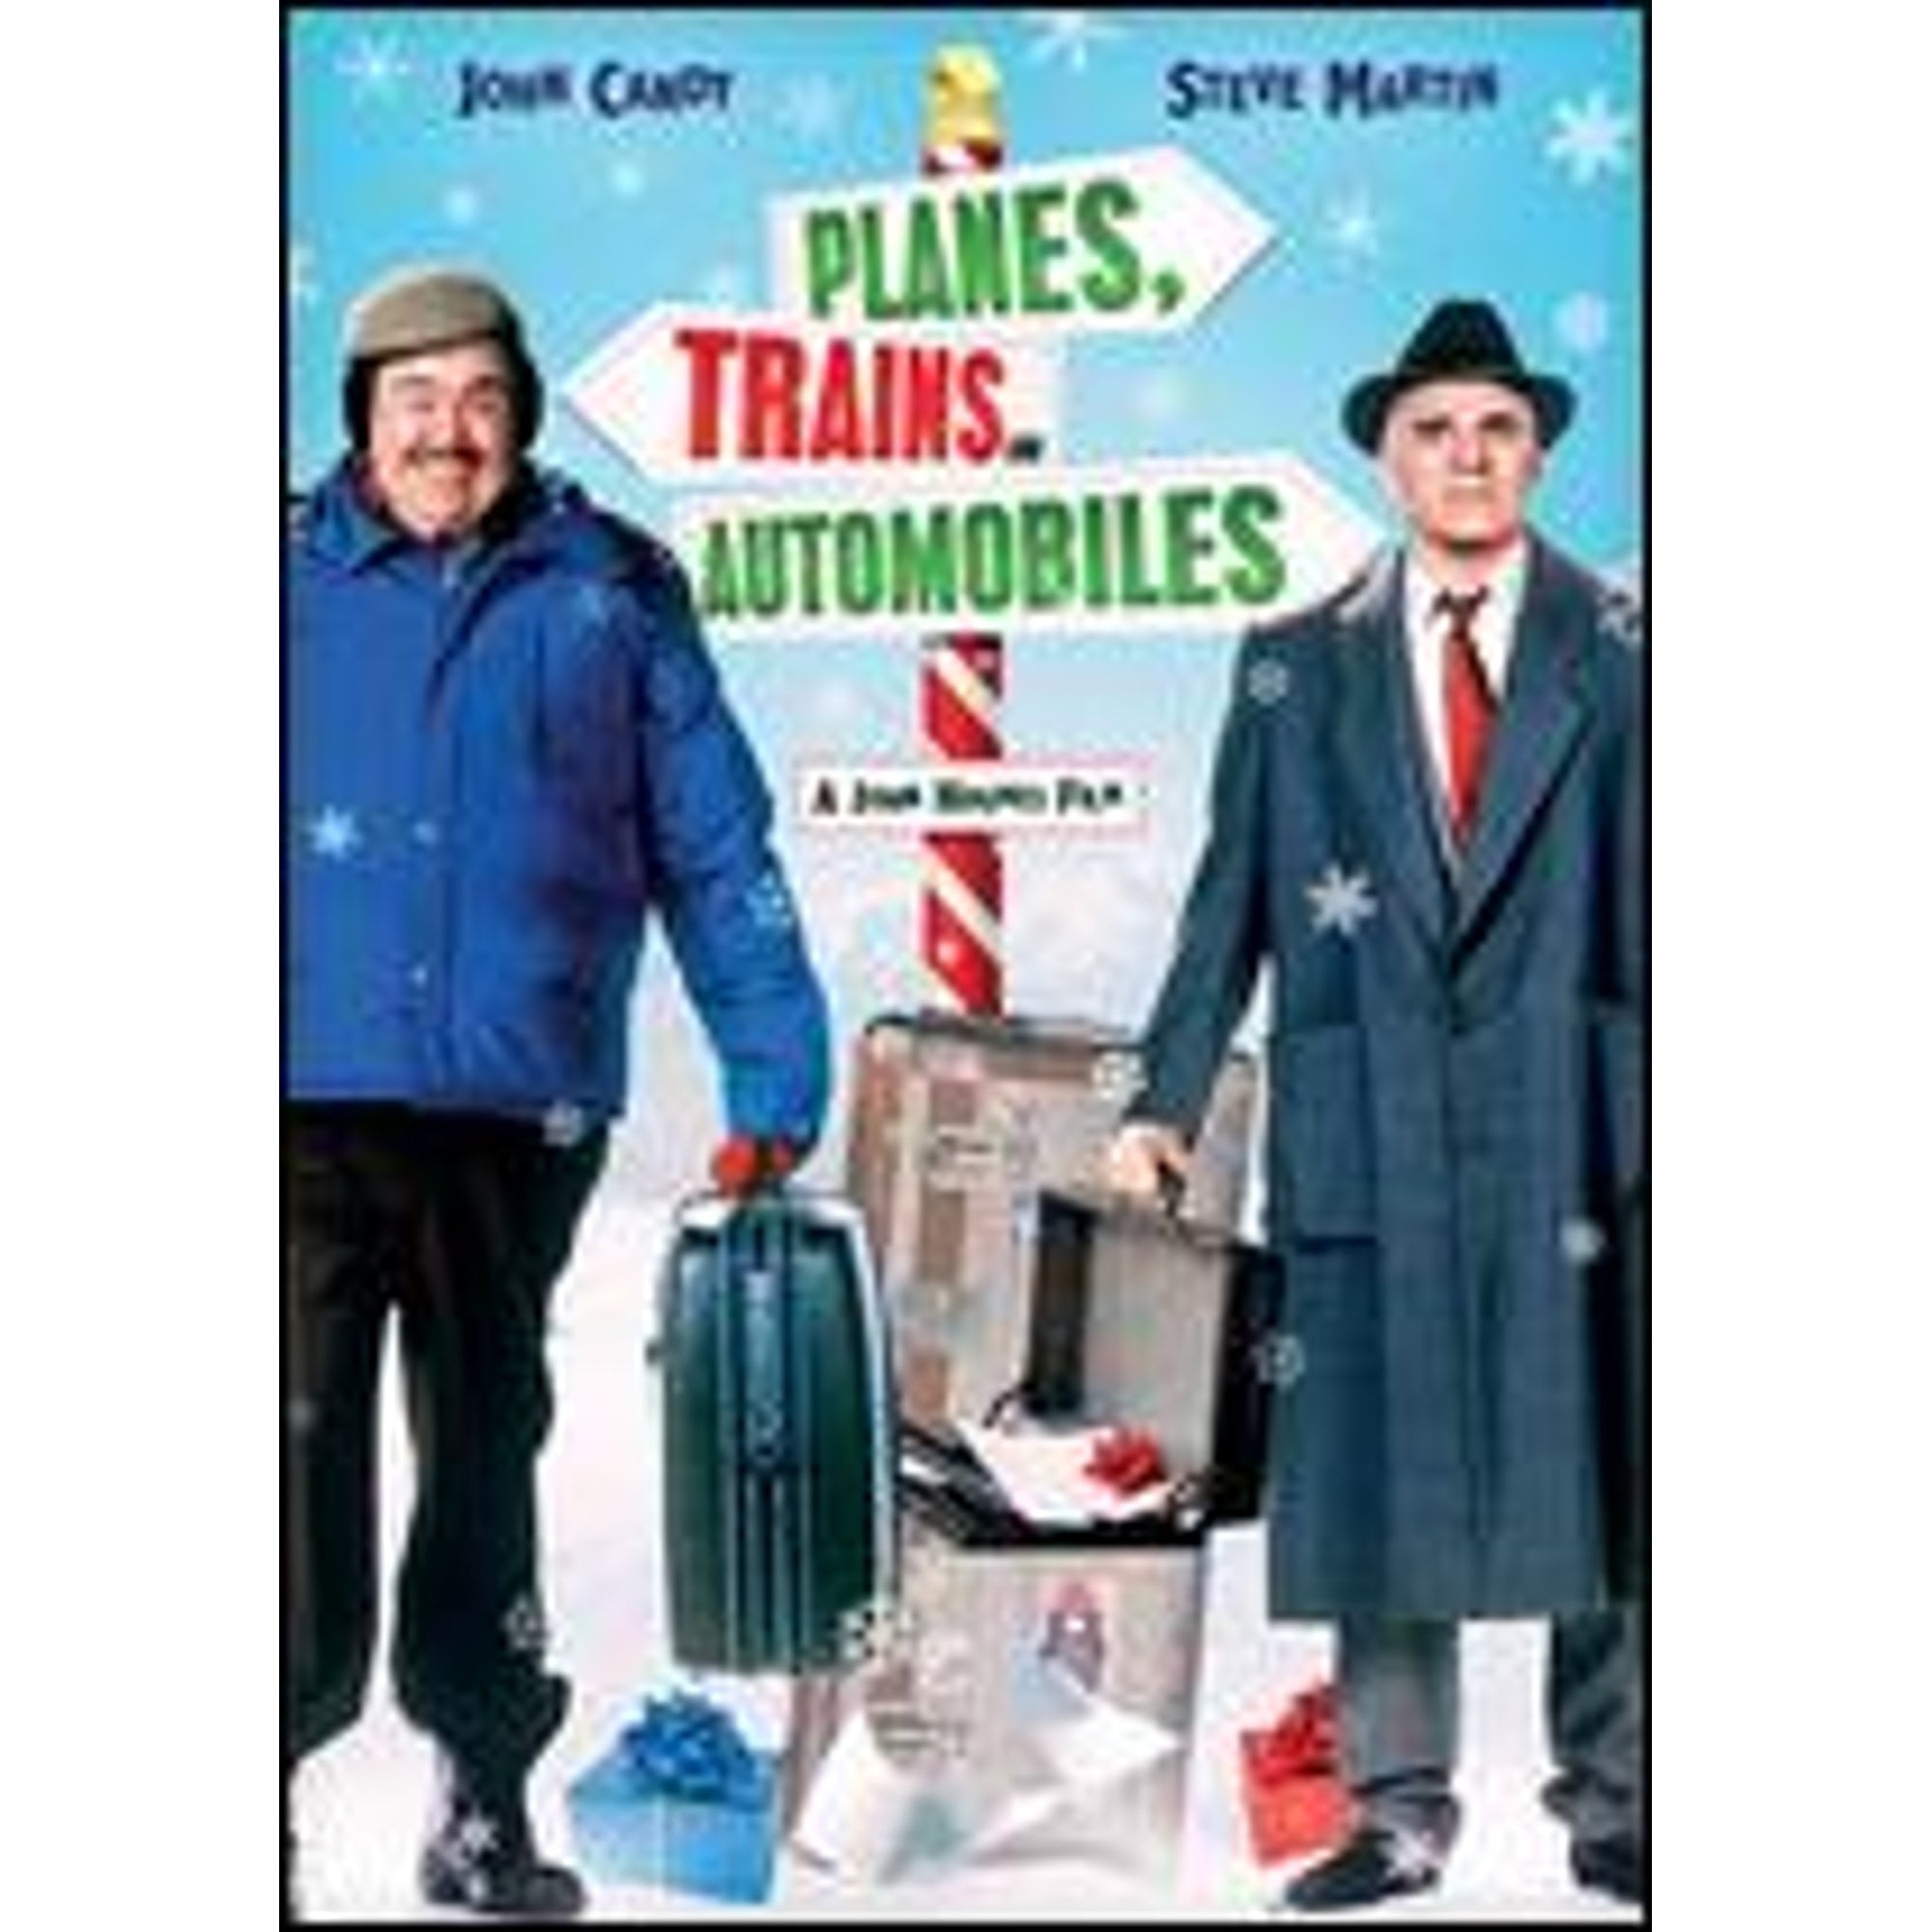 Pre-Owned Planes, Trains and Automobiles (DVD 0032429279453) directed by John Hughes